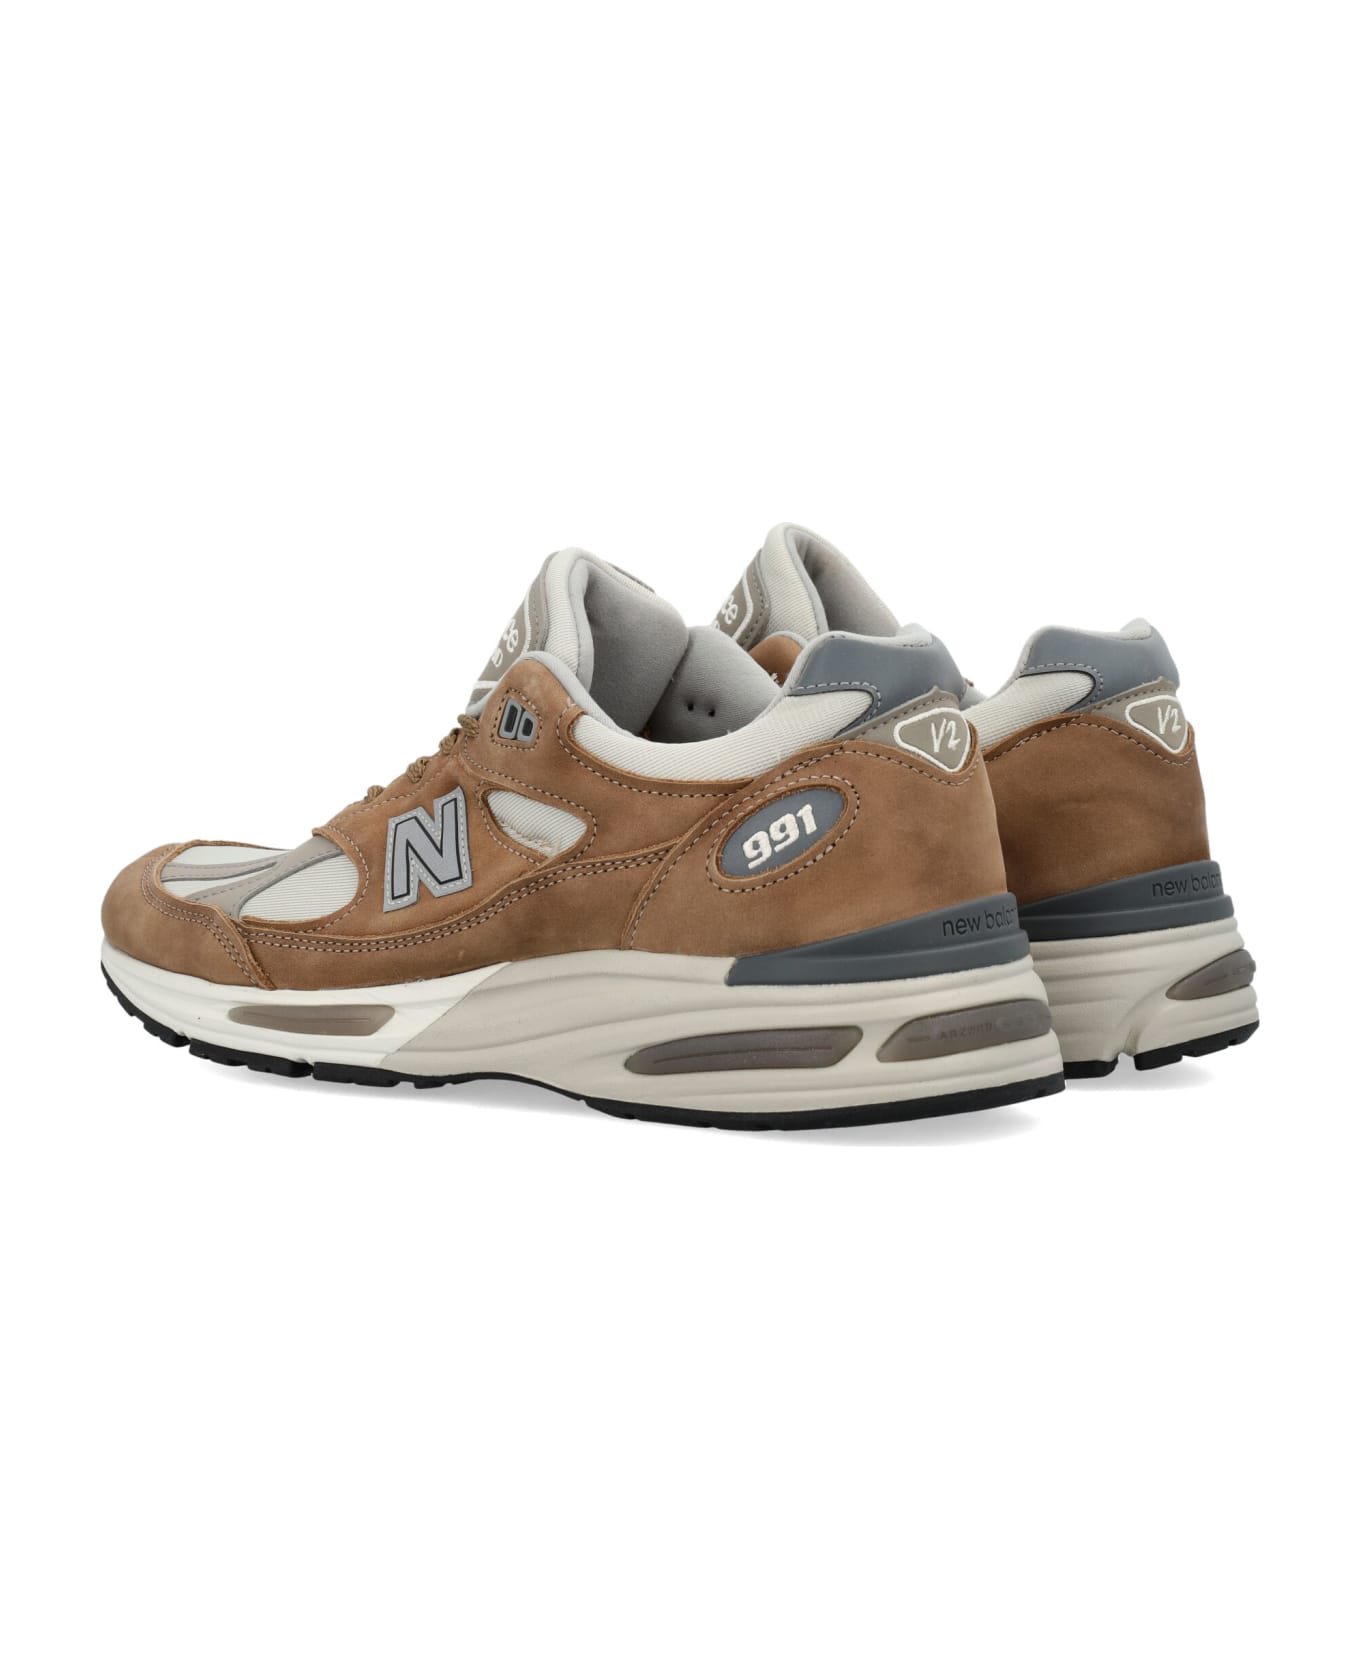 New Balance 991 Sneakers - BROWN